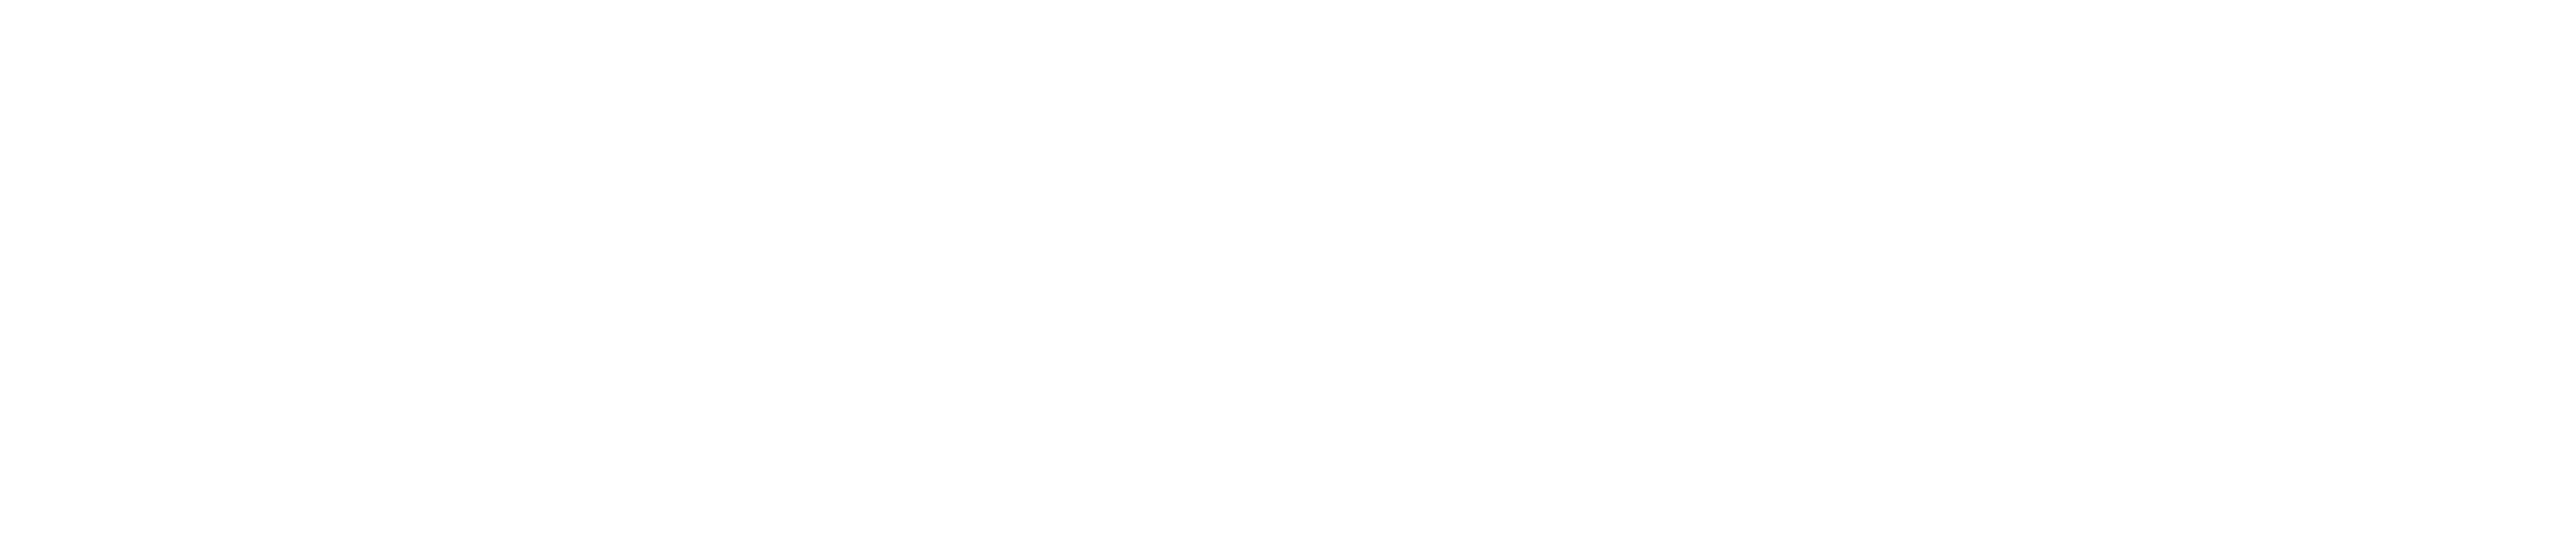 reef-claims-white